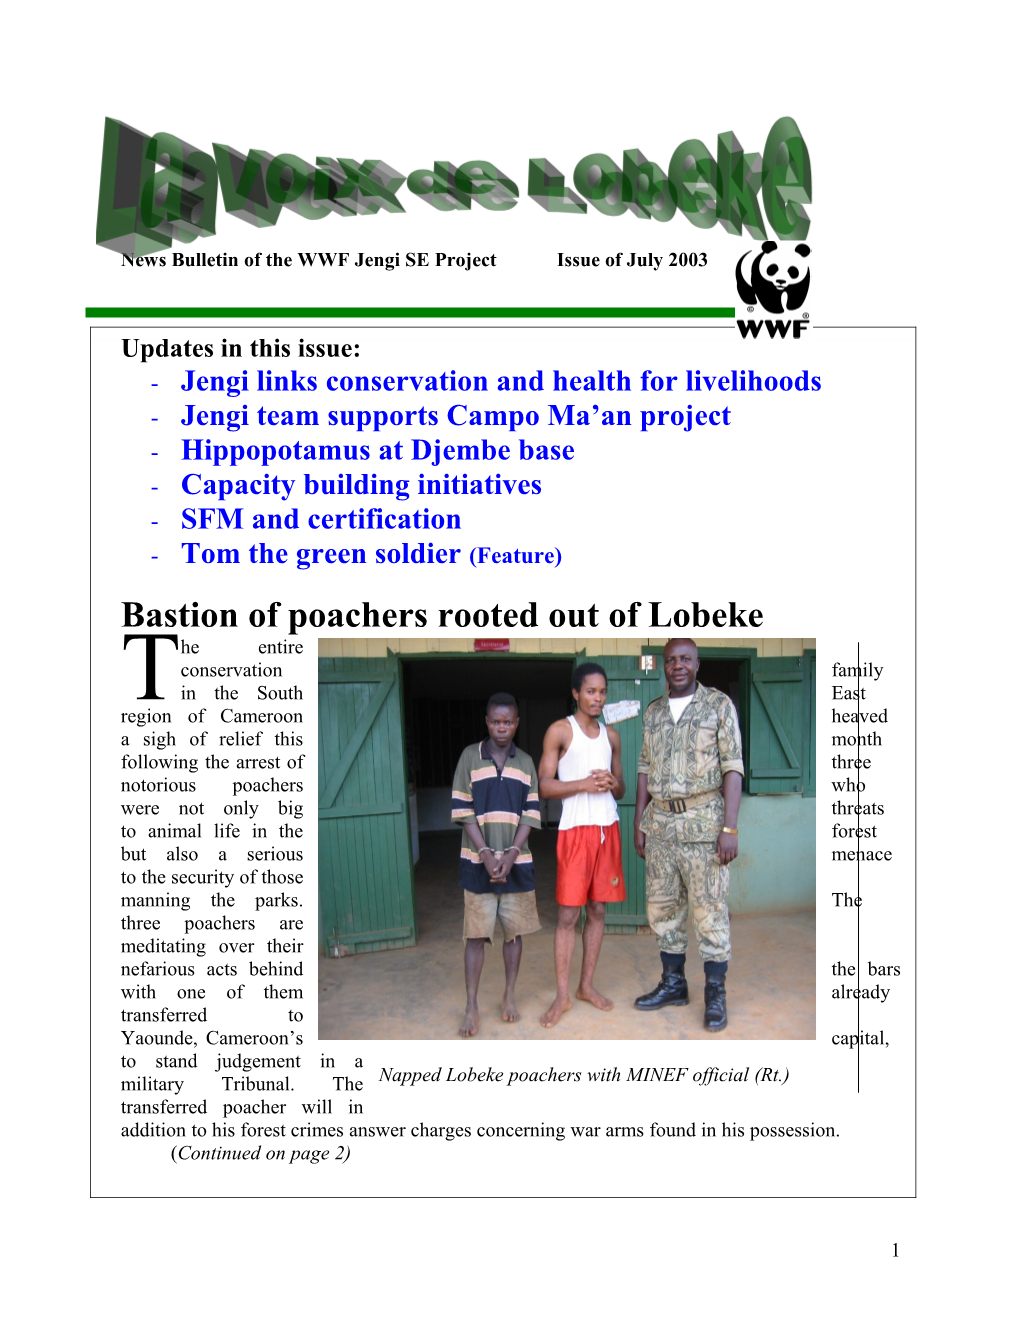 News Bulletin of the WWF Jengi SE Project Issue of July 2003